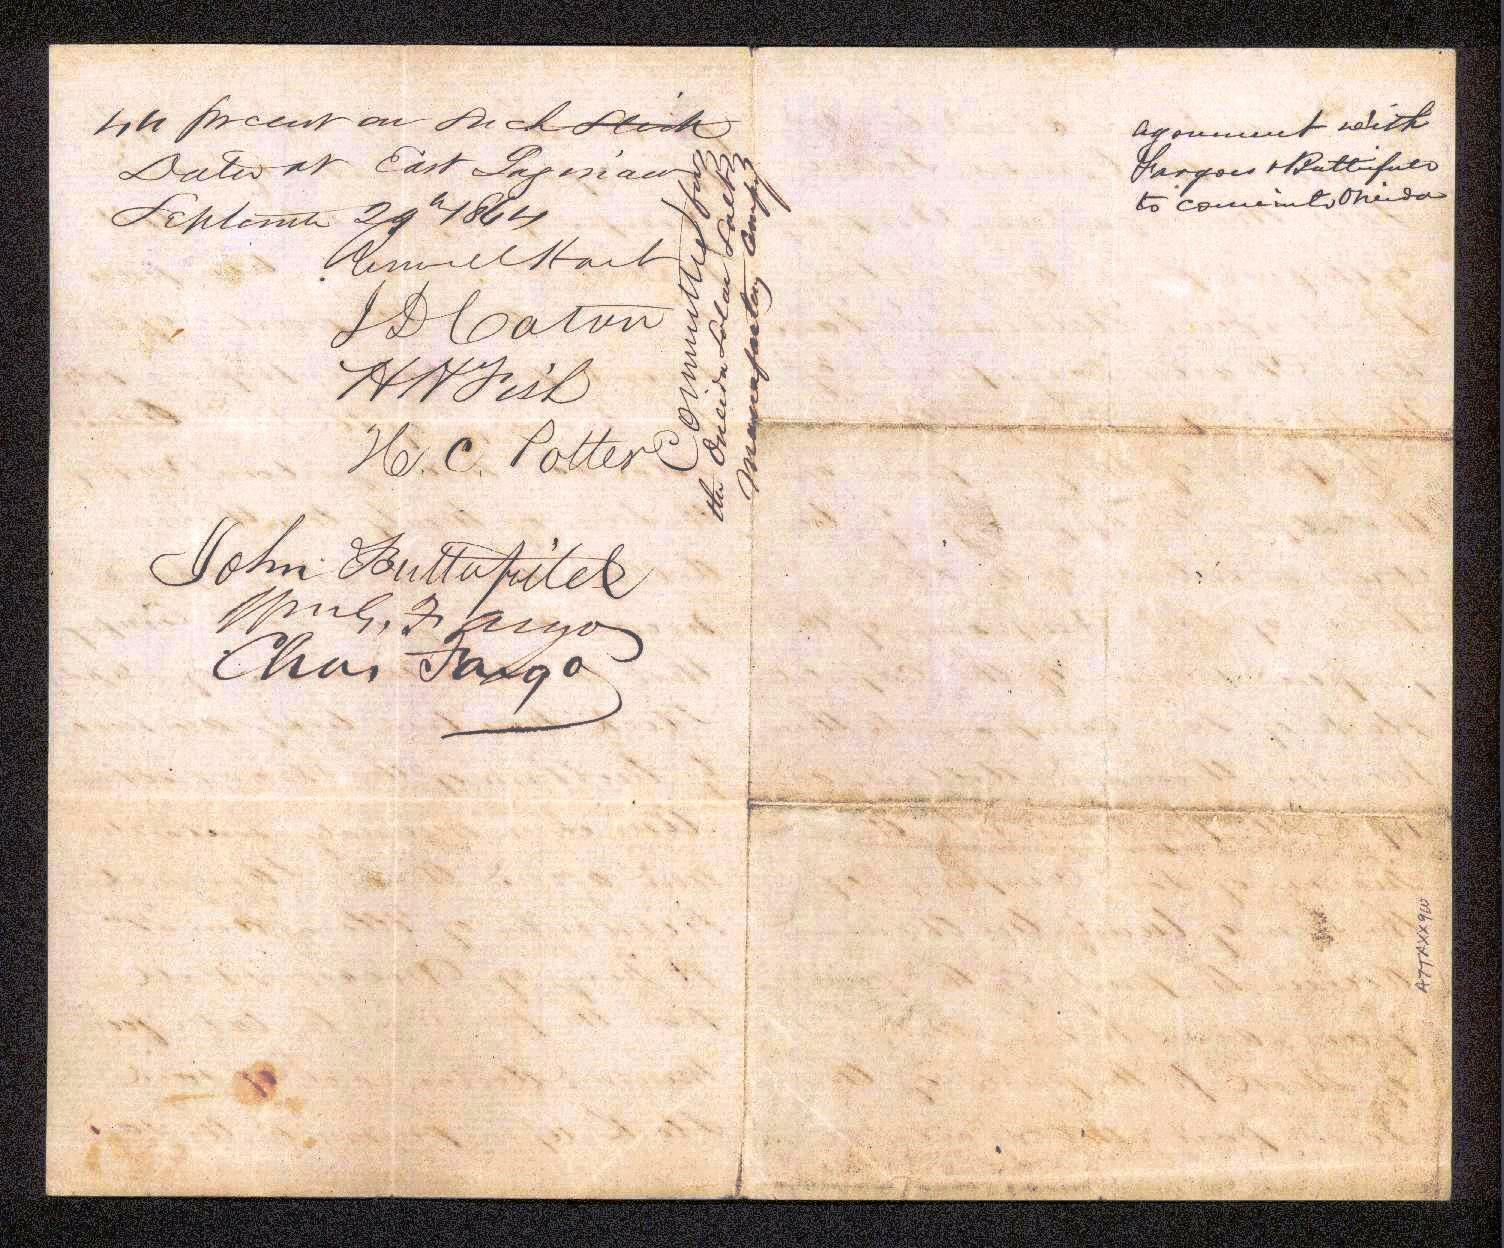 1864 American Express HUGE Deal signed William & Charles Fargo & J. Butterfield 